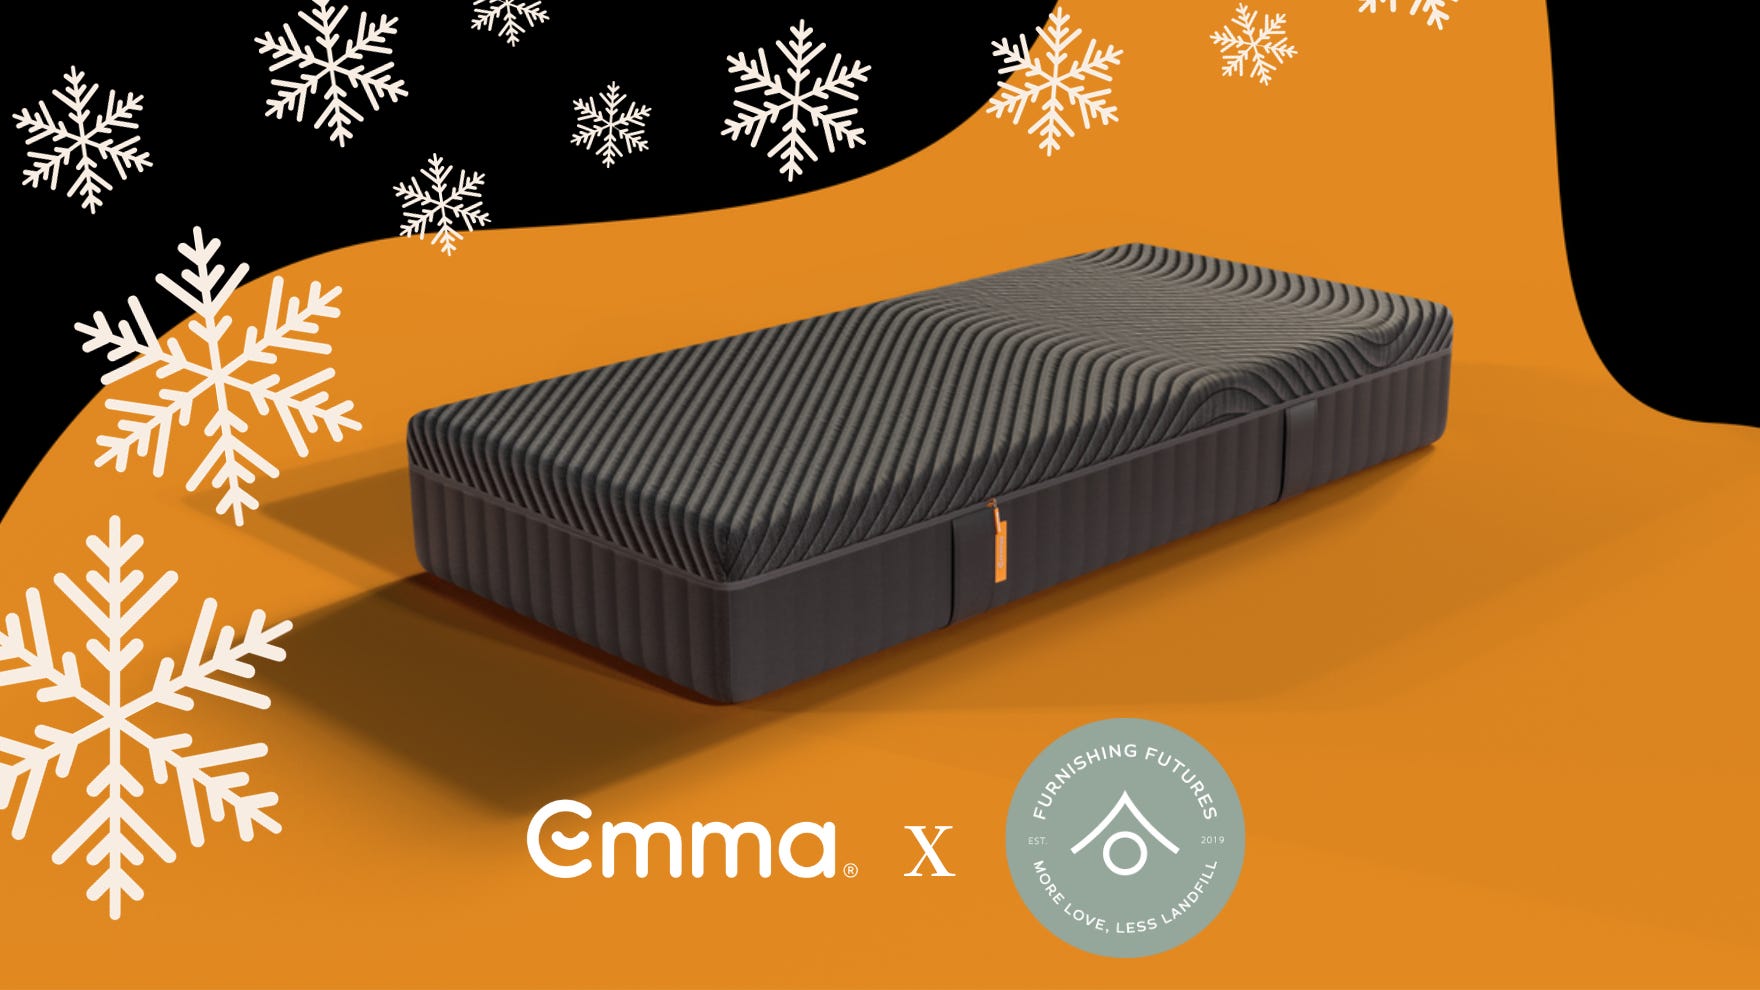 We're making a one-of-a-kind exclusive mattress for one lucky winner. Sign up now to get the Emma Masterpiece Mattress.